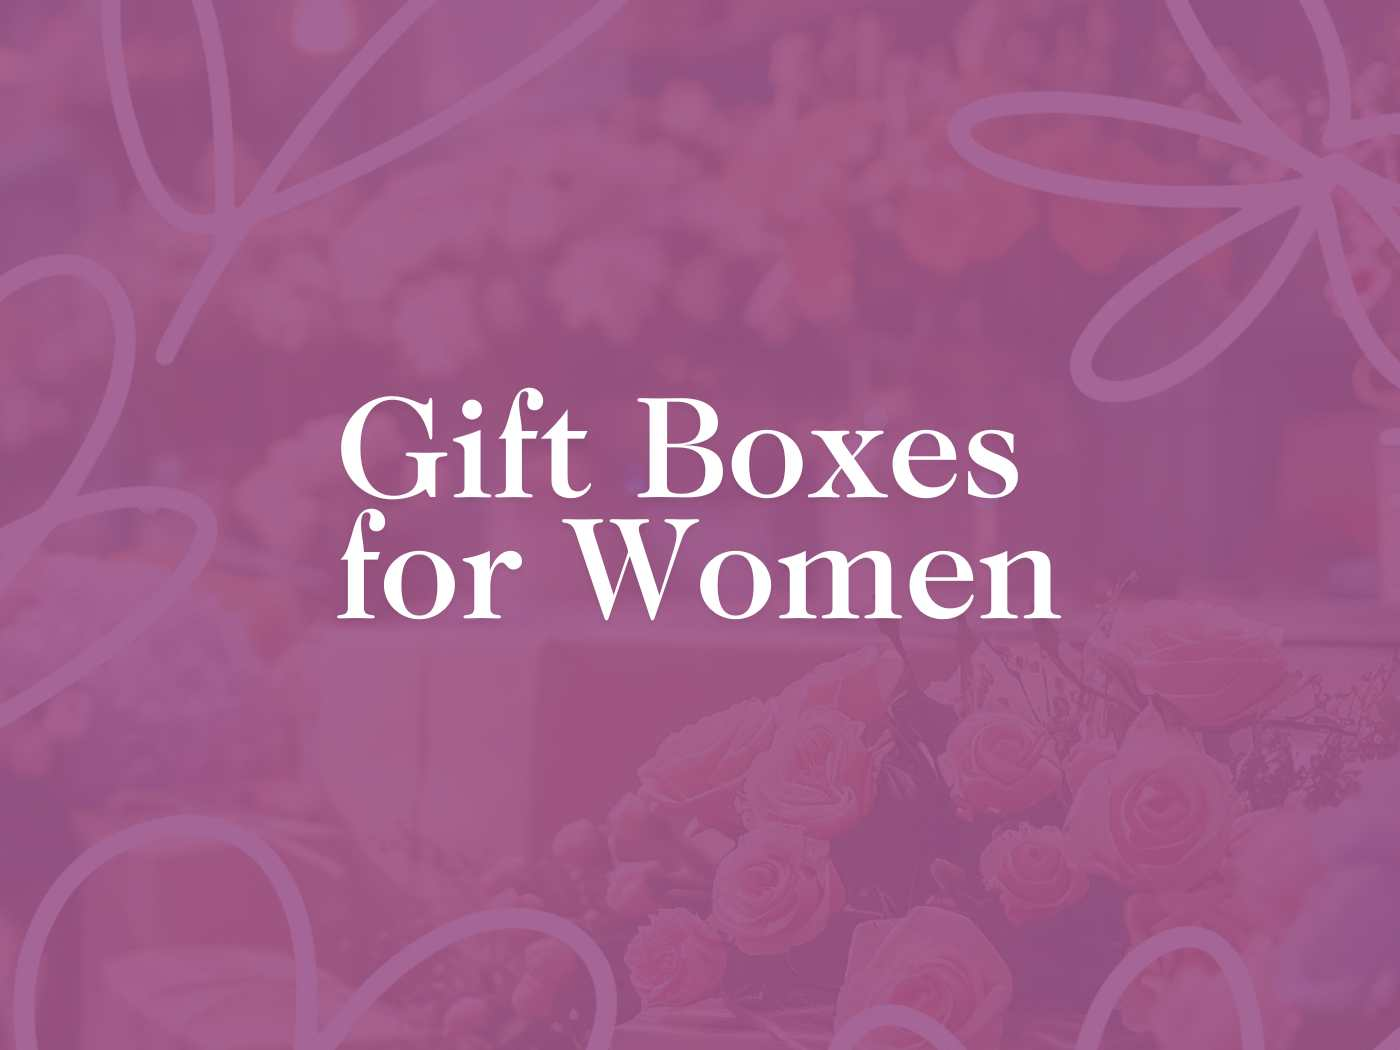 Elegant promotional banner for the Gifts Boxes for Women Collection, featuring a soft, romantic pink overlay with floral accents. Perfect for a thoughtful gift basket, including personal notes, body lotion, and milk chocolate. Fabulous Flowers and Gifts.